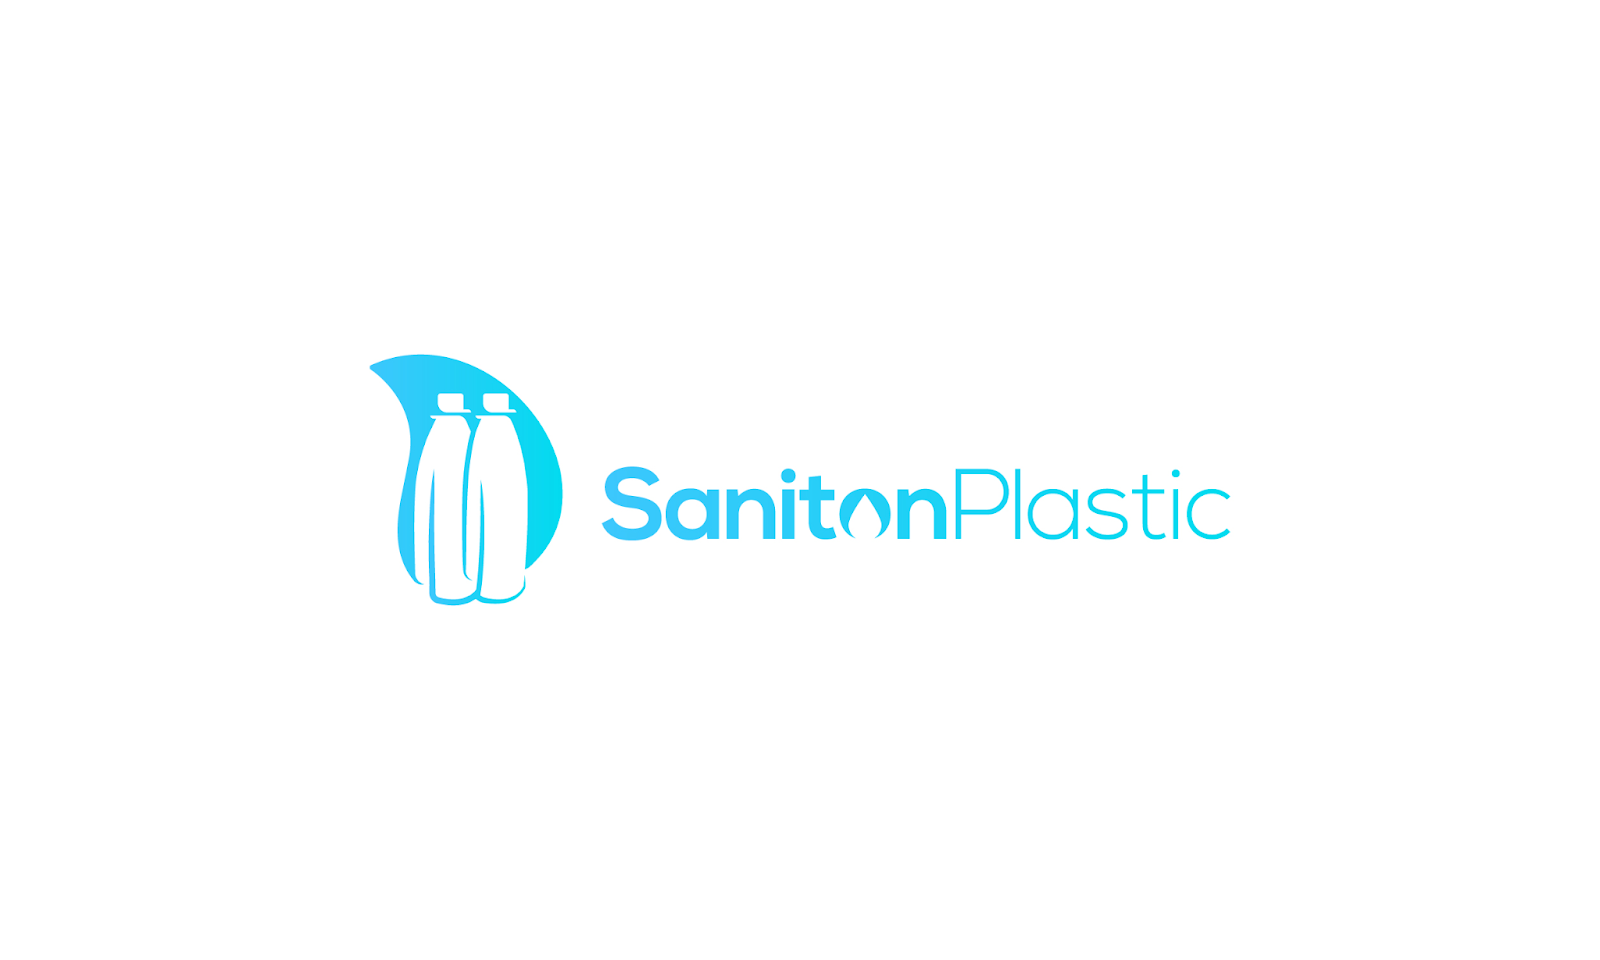 Saniton Plastic, Friday, September 9, 2022, Press release picture